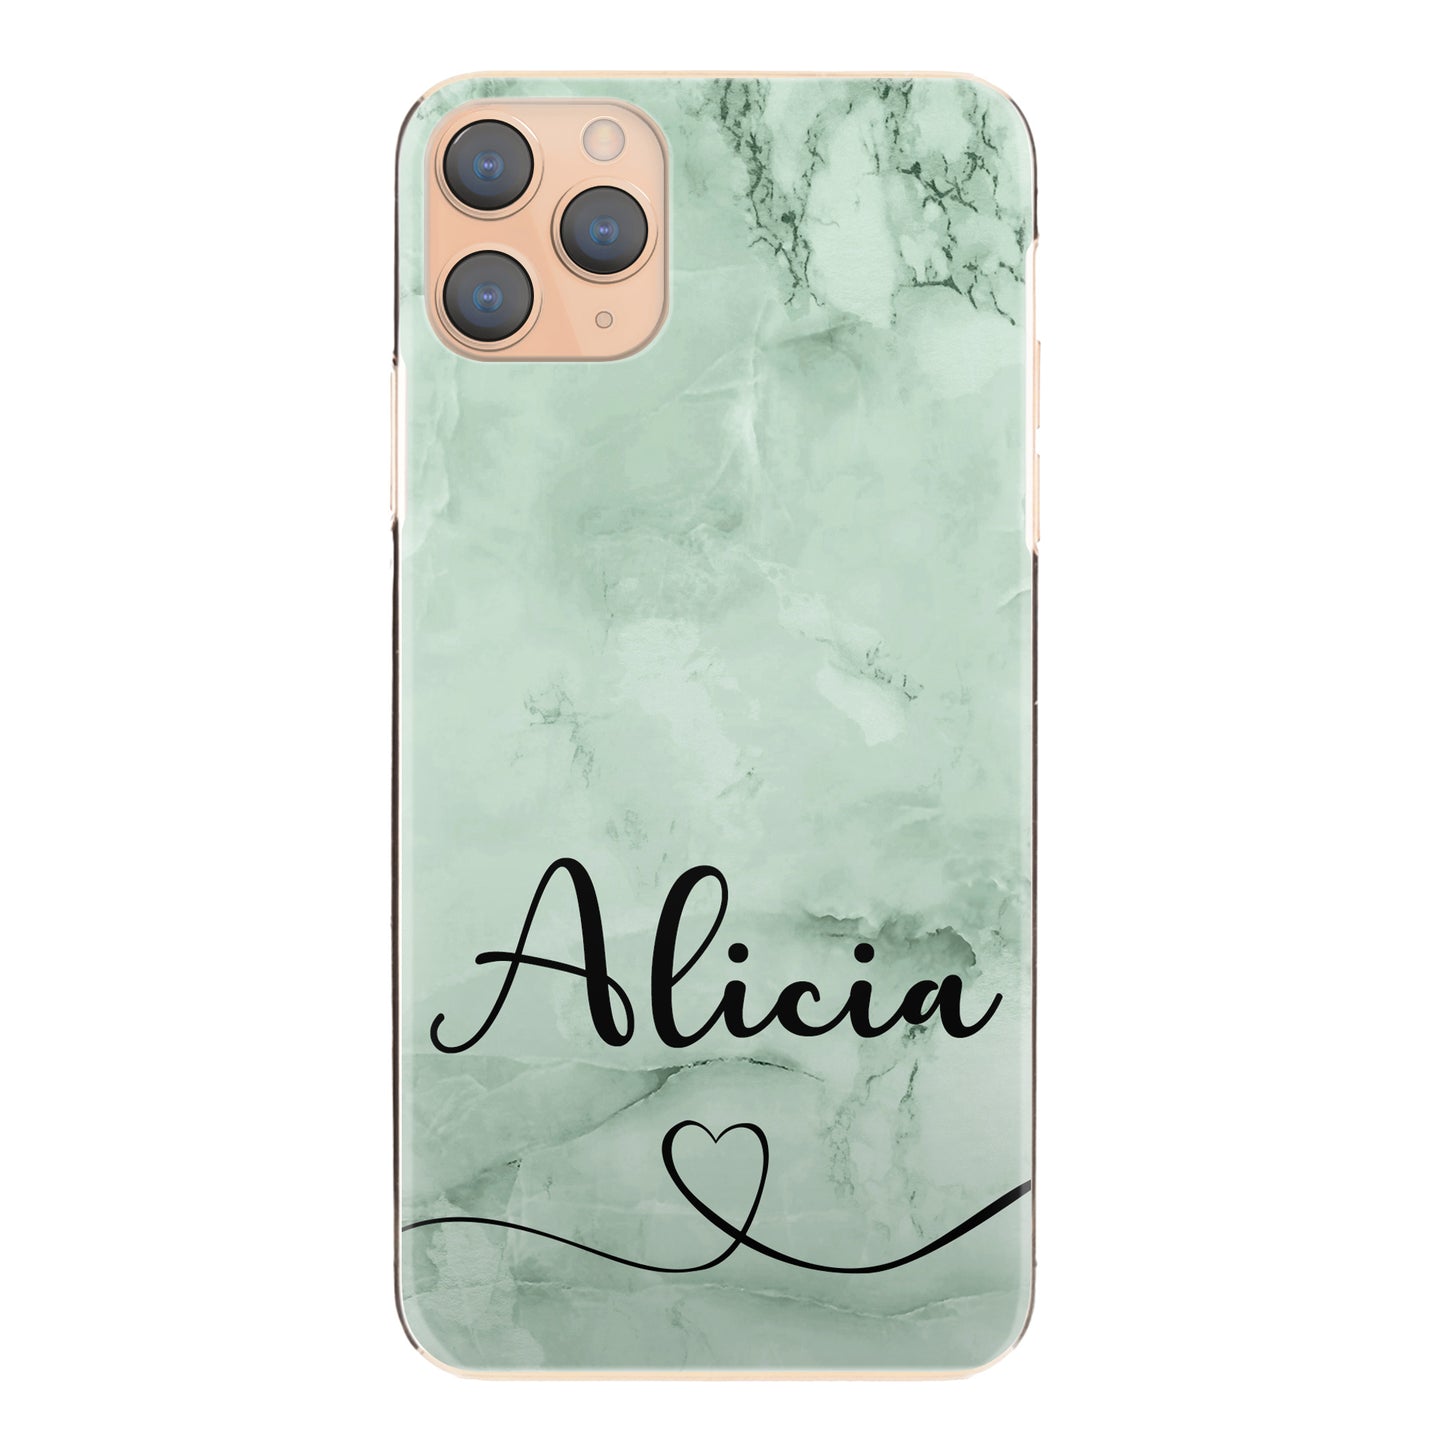 Personalised Samsung Galaxy Phone Hard Case with Heart Accented Stylish Text on Mint Green Marble